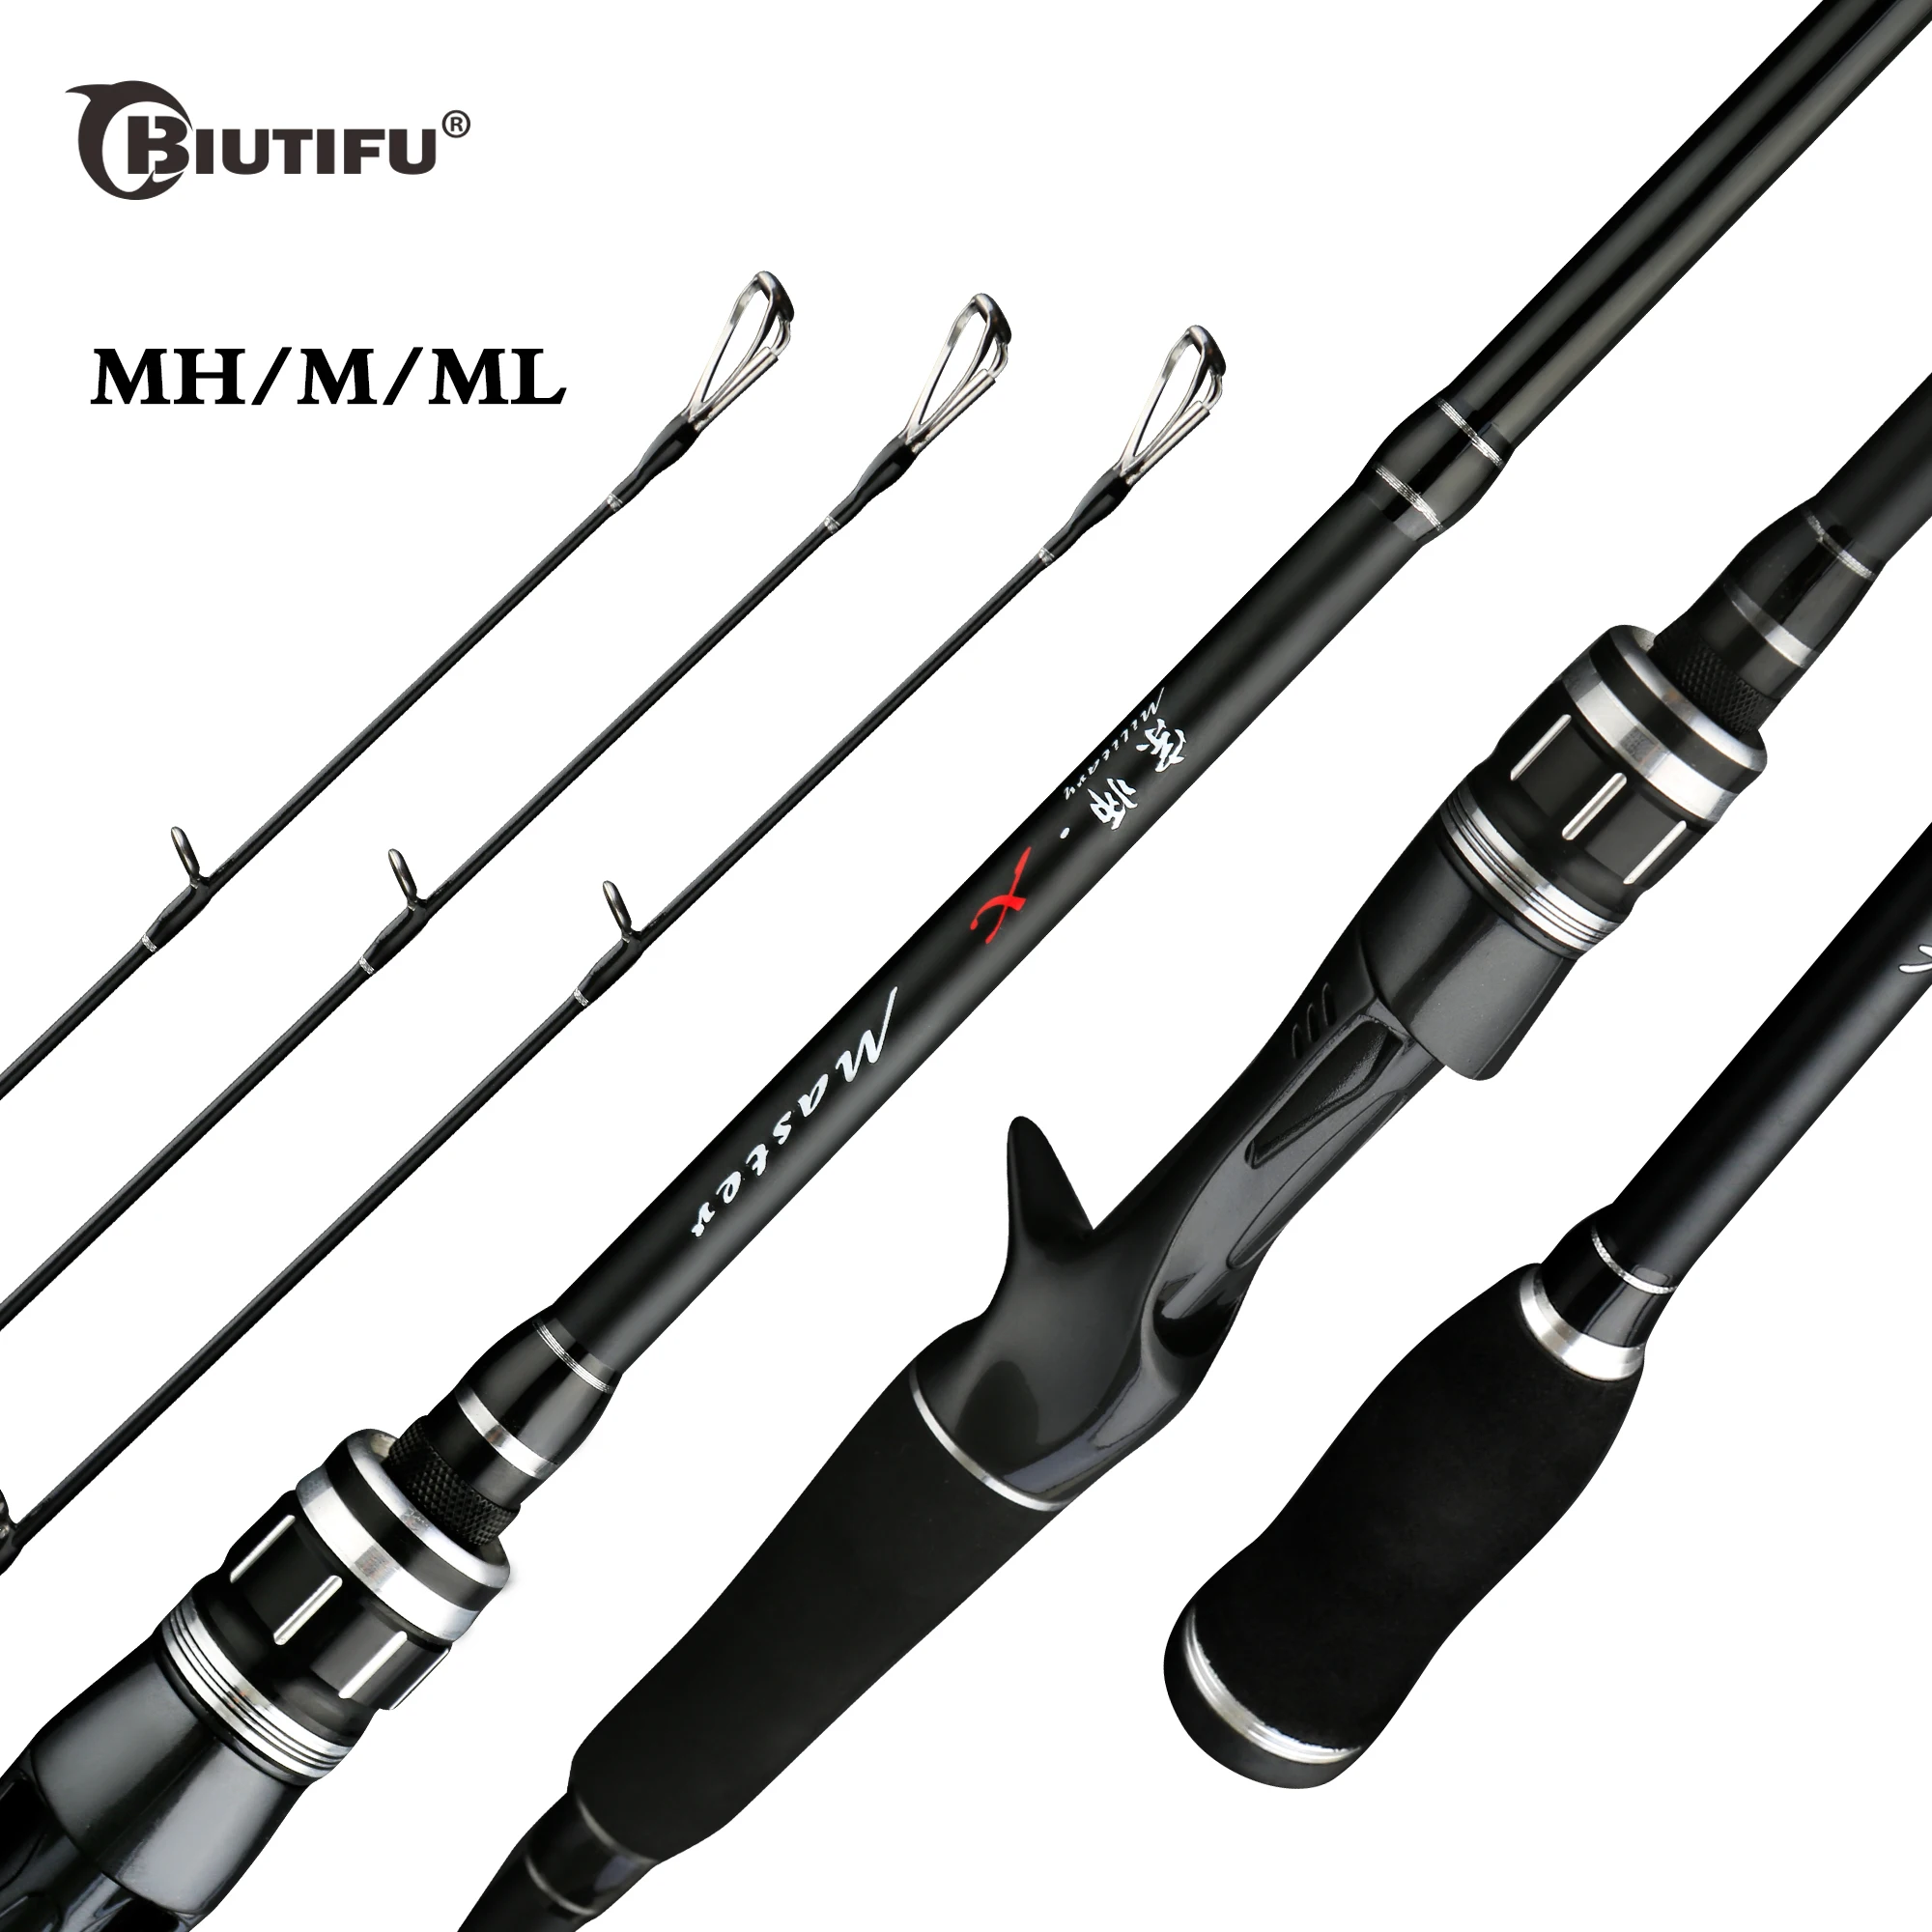 BIUTIFU 2Sections 2.4/2.1/1.8m Spinning Casting 3Tips Lure Fishing Rod 30T Carbon Bait 4-40g ML/M/MH Baitcasting Bass Fast Pole